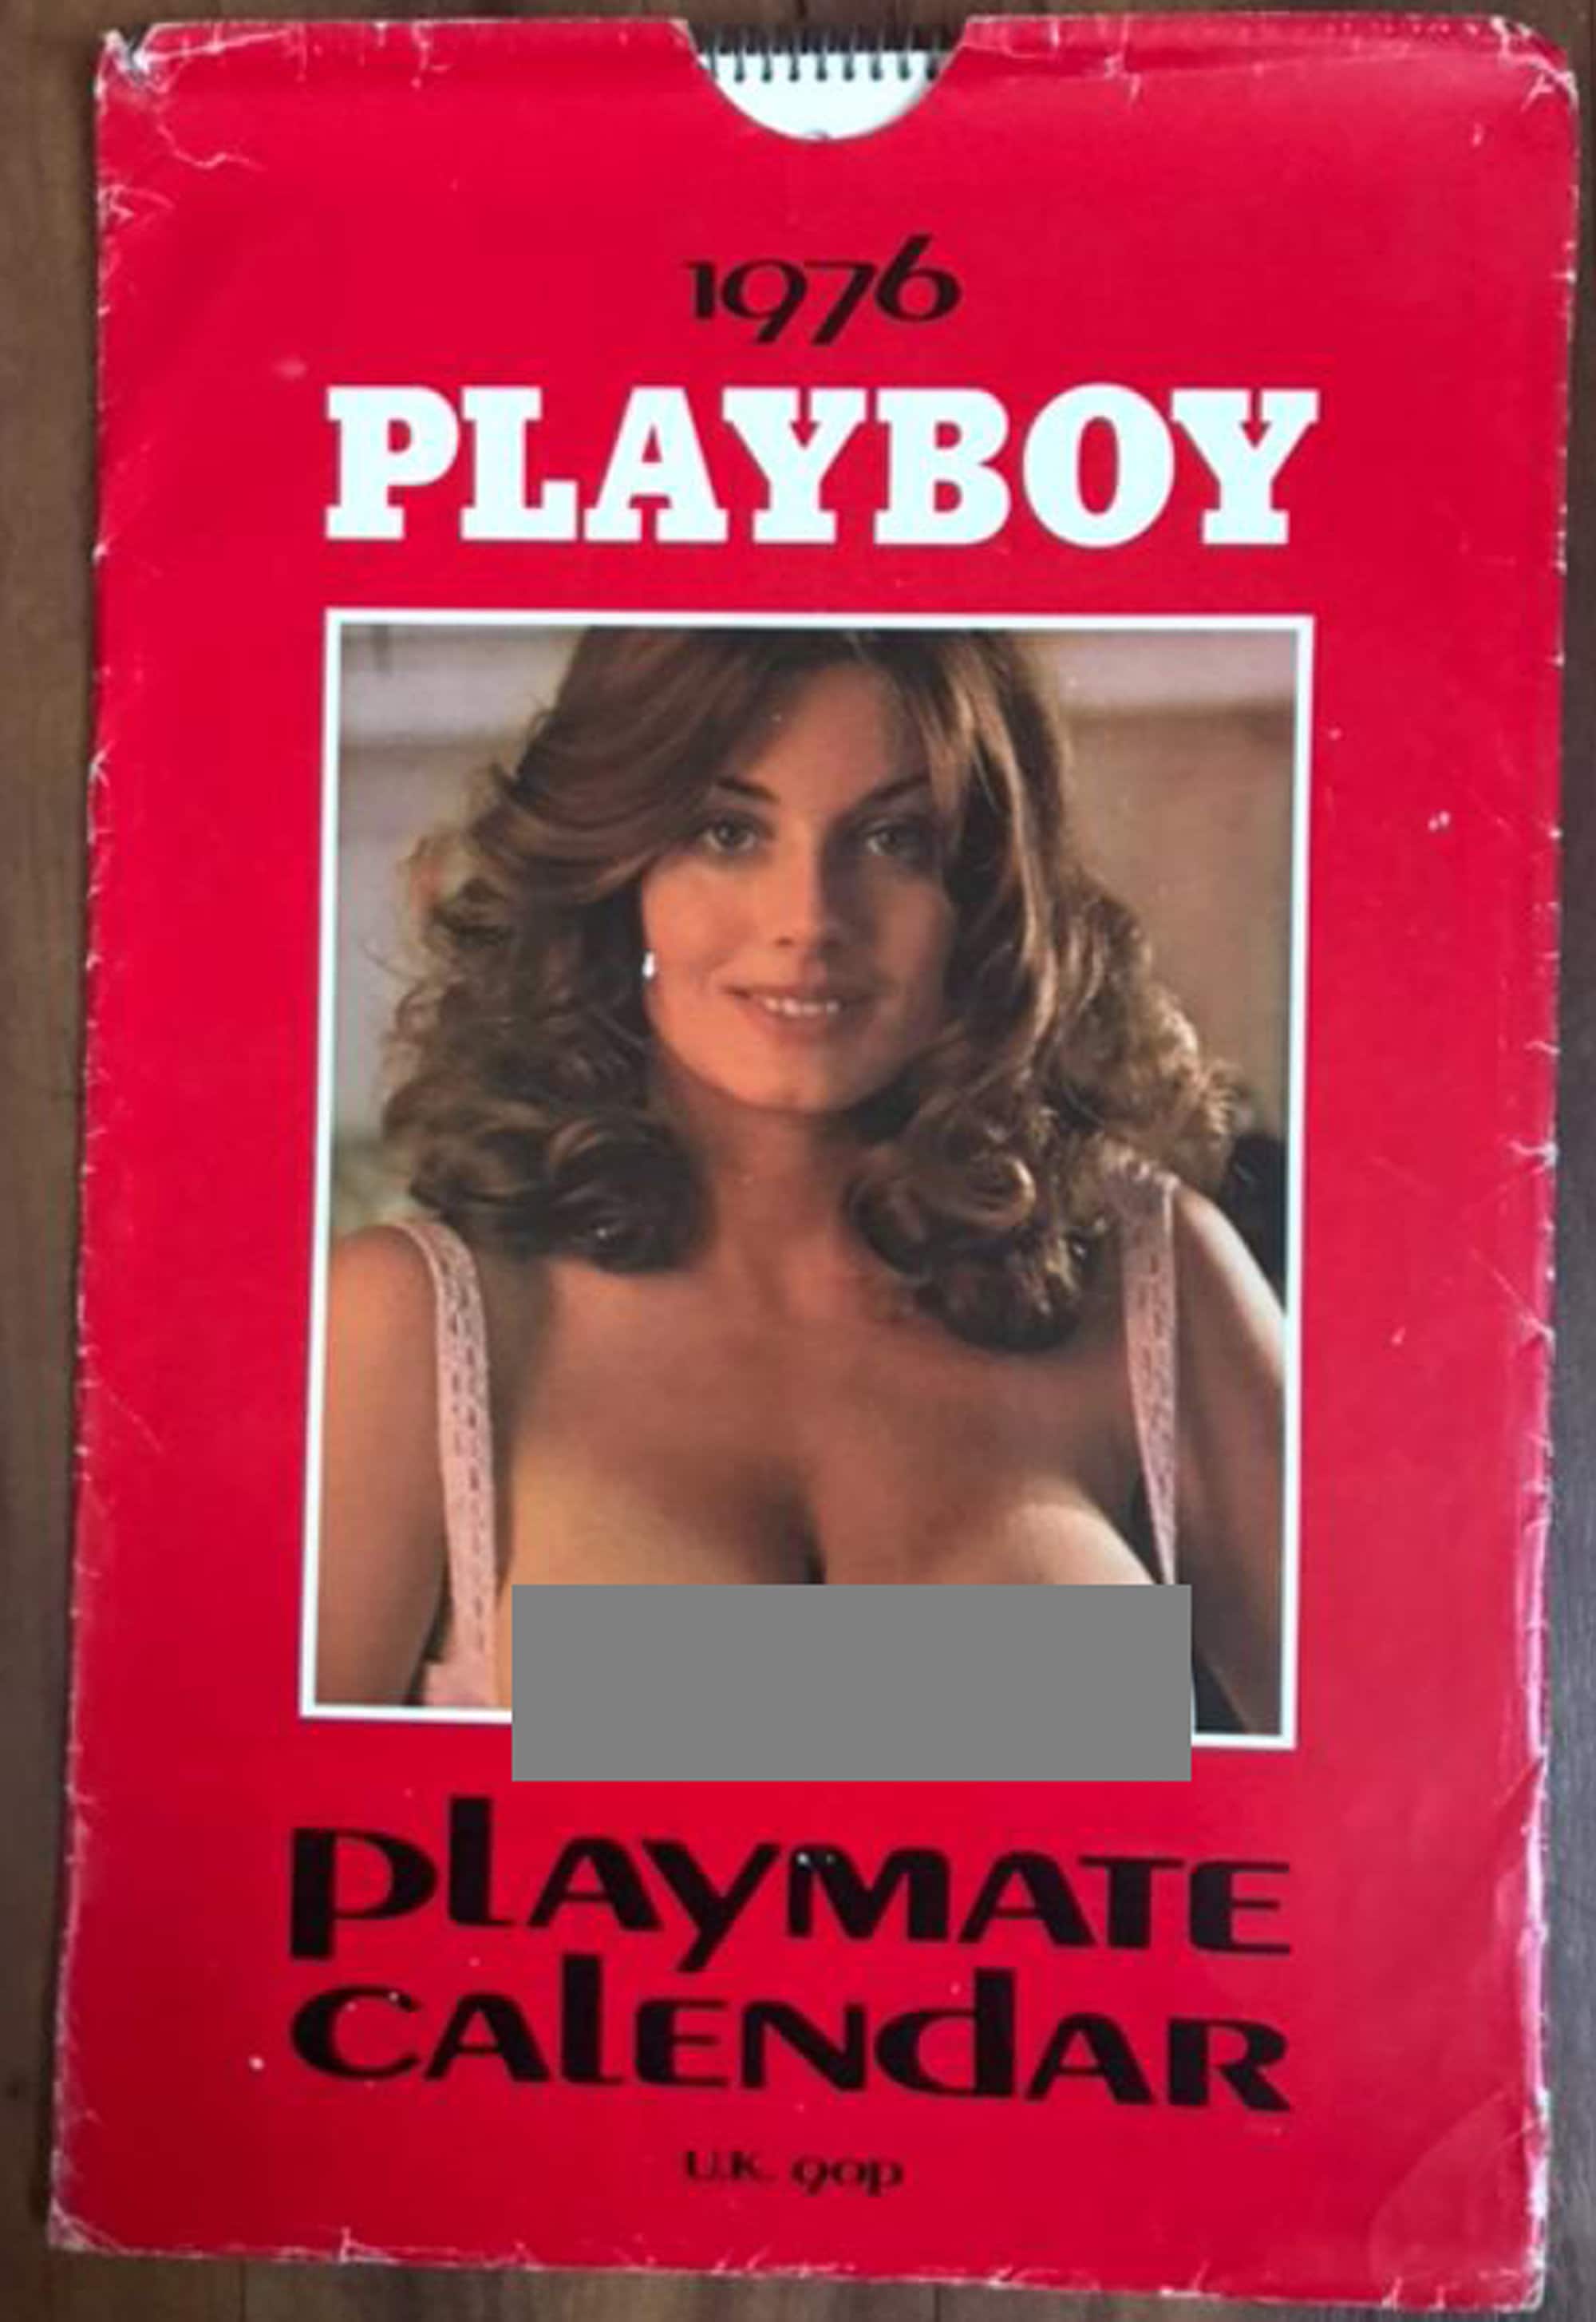 brittany lynn wilson recommends Playmate Of The Year 1976